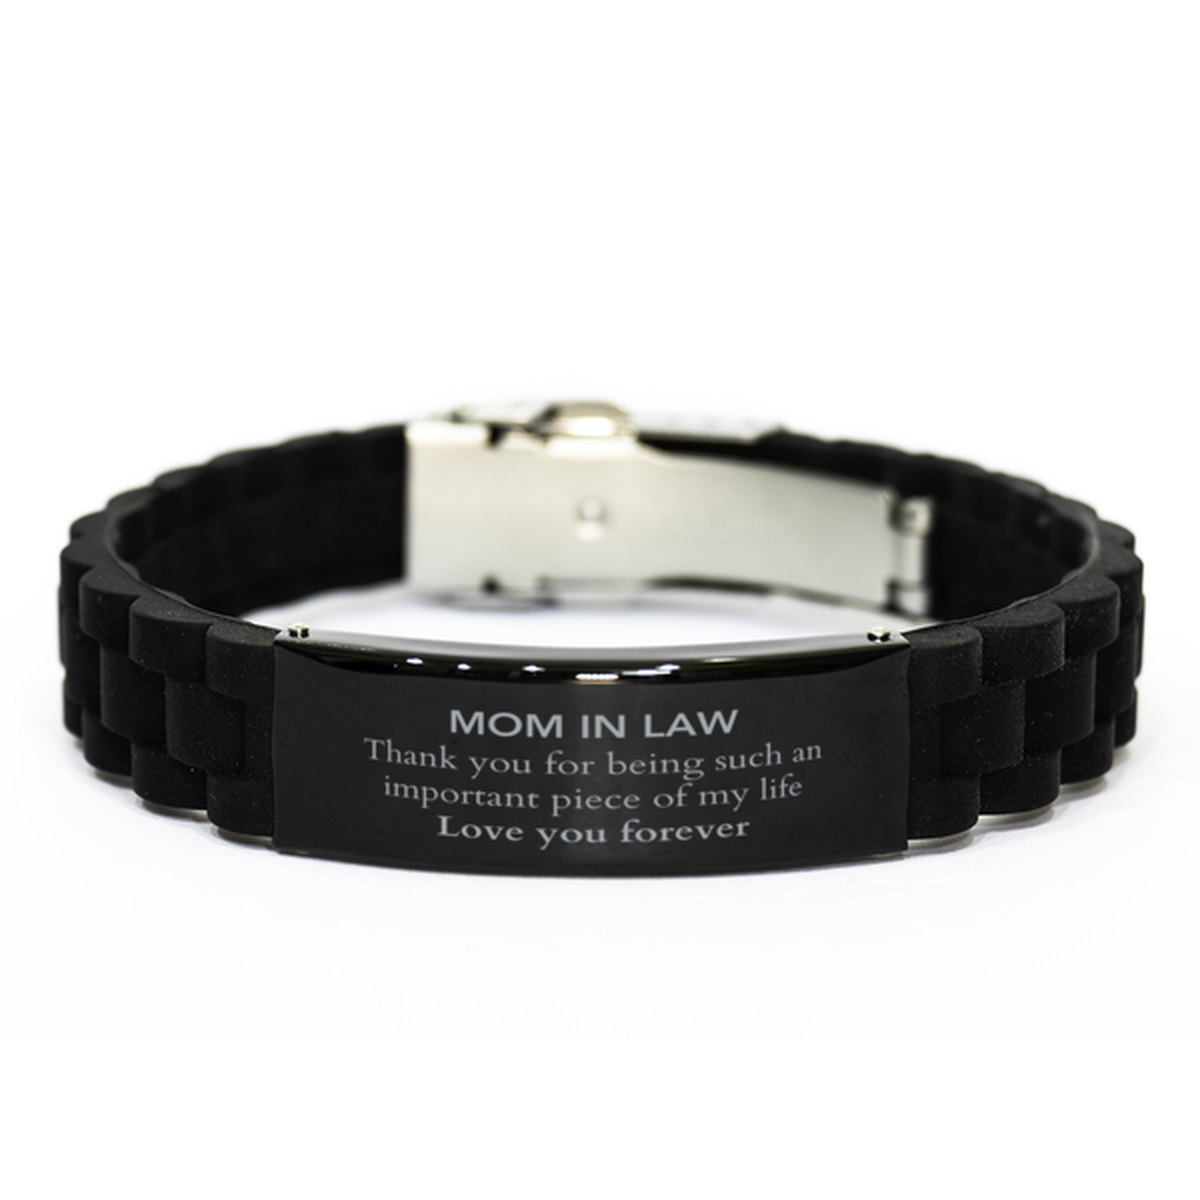 Appropriate Mom In Law Black Glidelock Clasp Bracelet Epic Birthday Gifts for Mom In Law Thank you for being such an important piece of my life Mom In Law Christmas Mothers Fathers Day